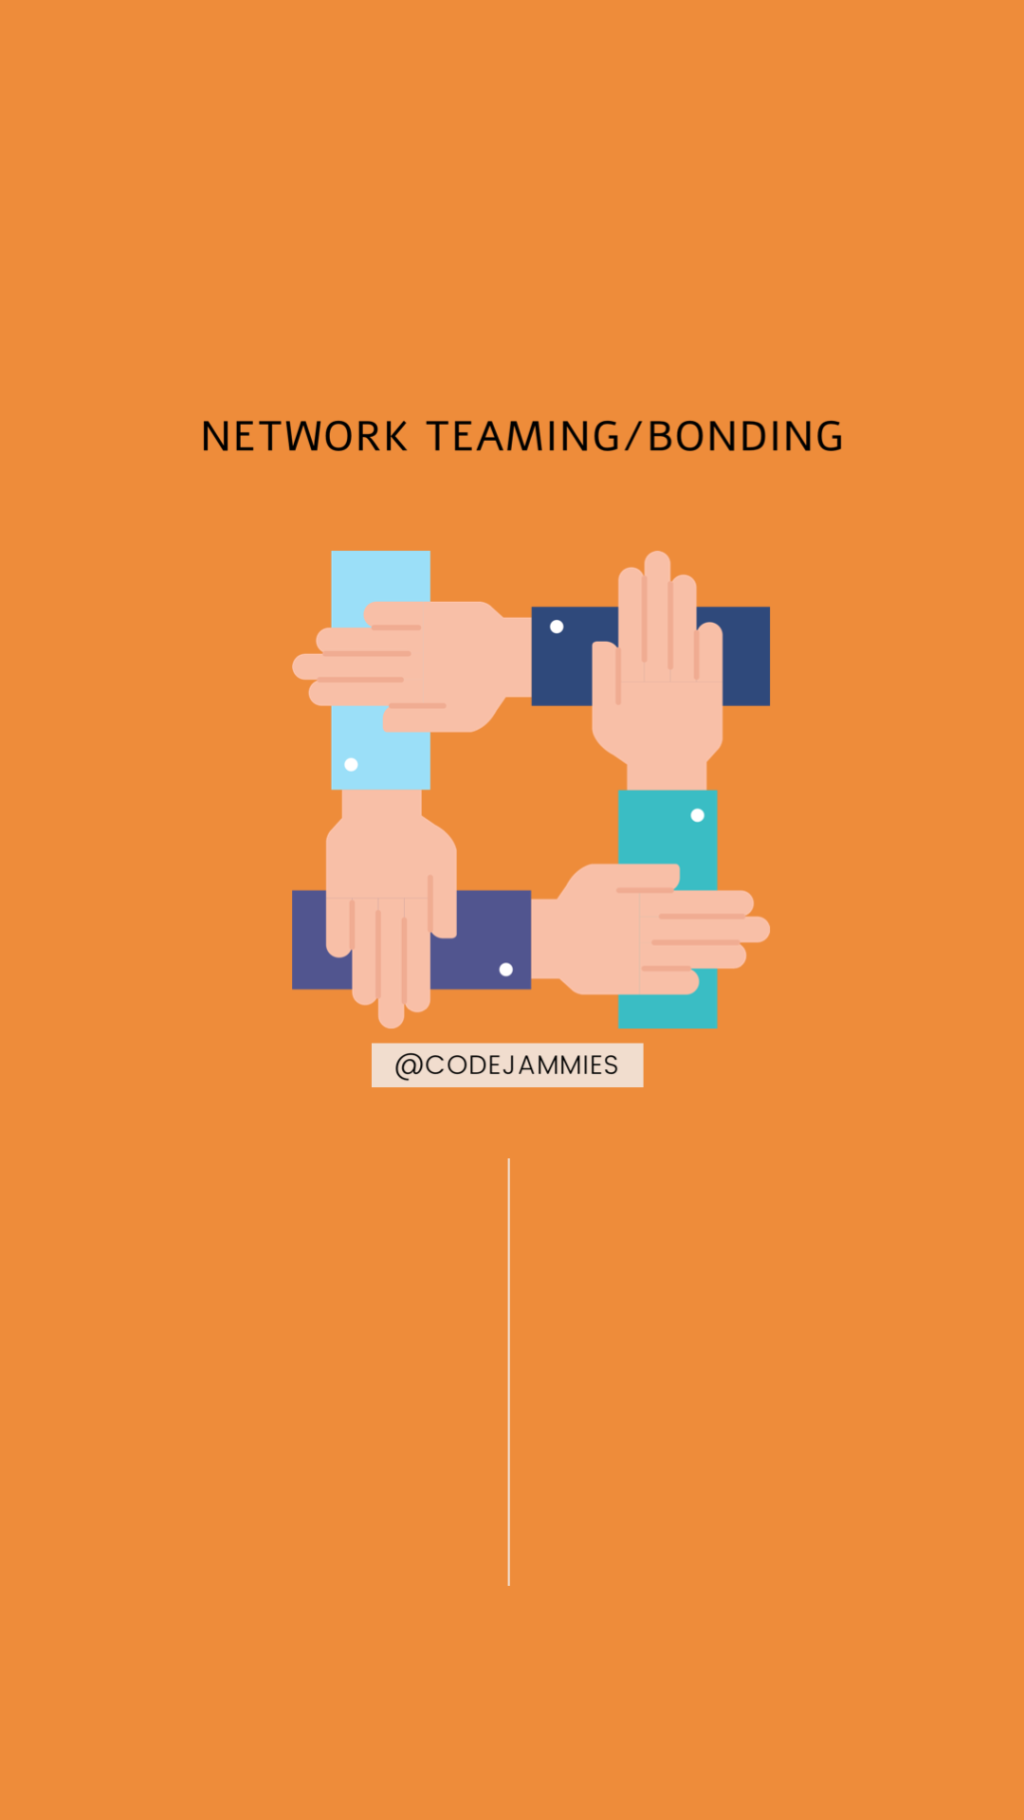 30 Seconds Read: Network Teaming/Bonding 🤝